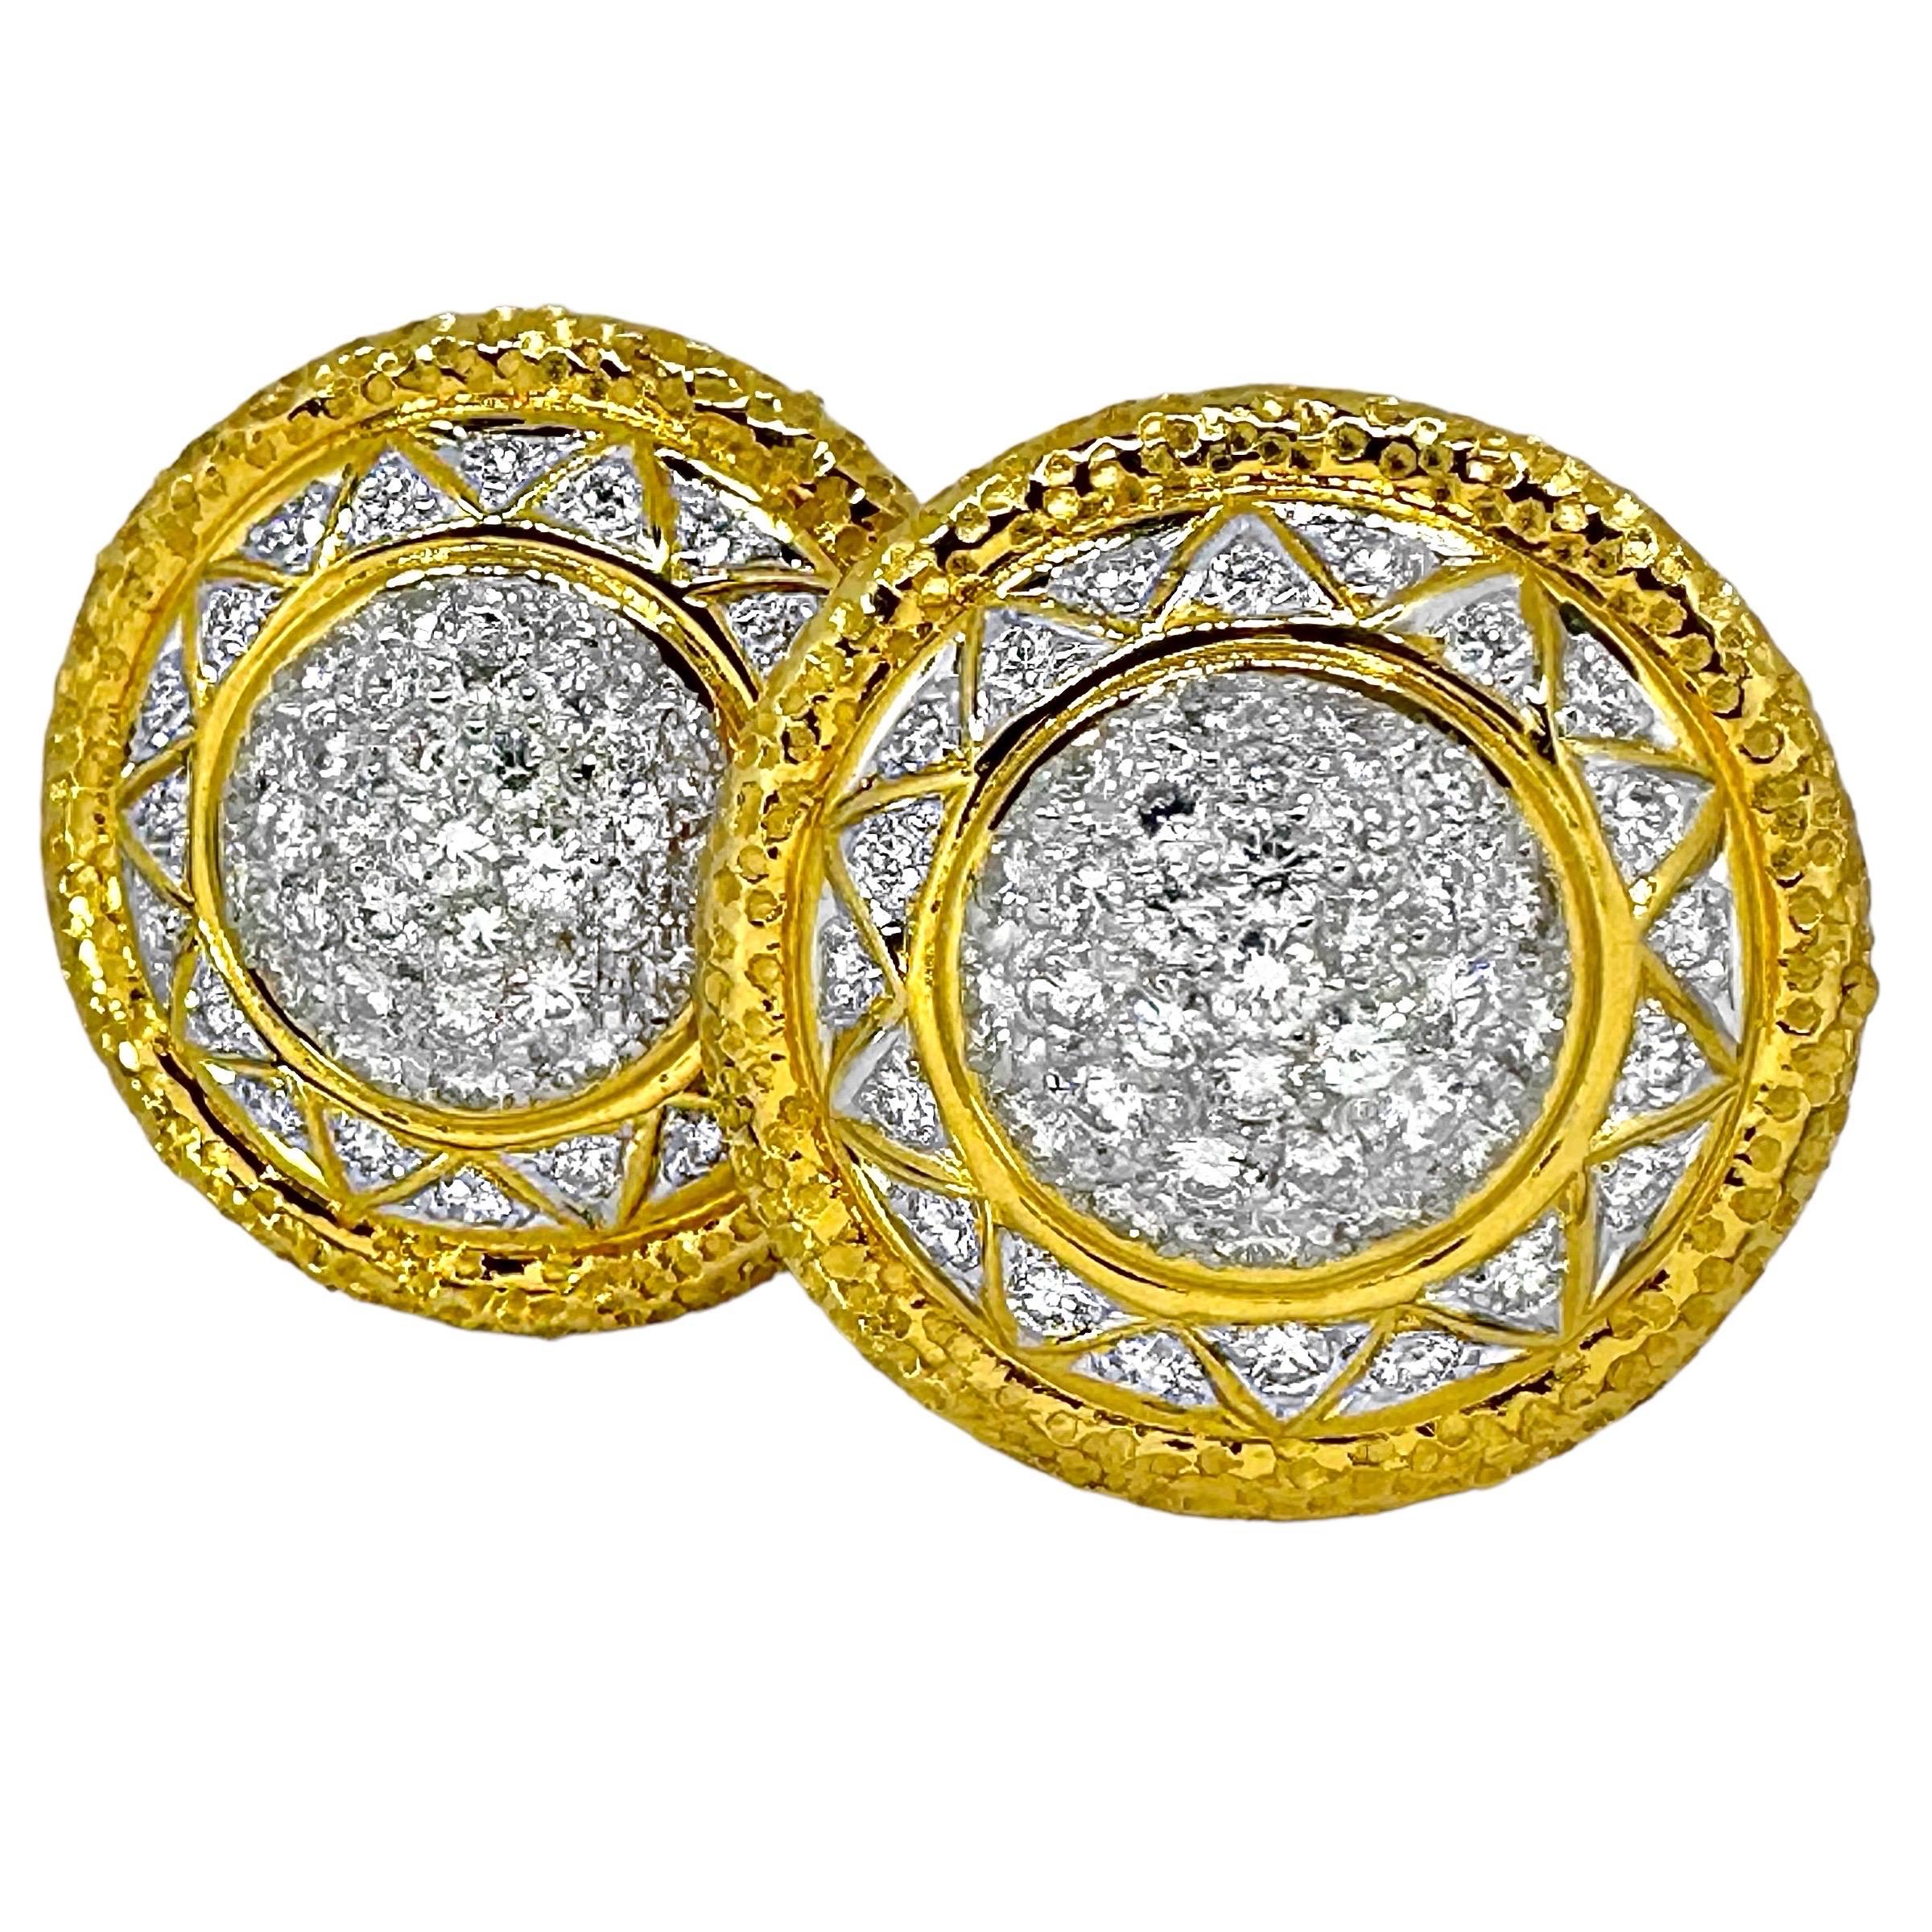 18K Stylish & Tailored Gold & Diamond Encrusted Dome Earrings 7/8 Inch Diameter